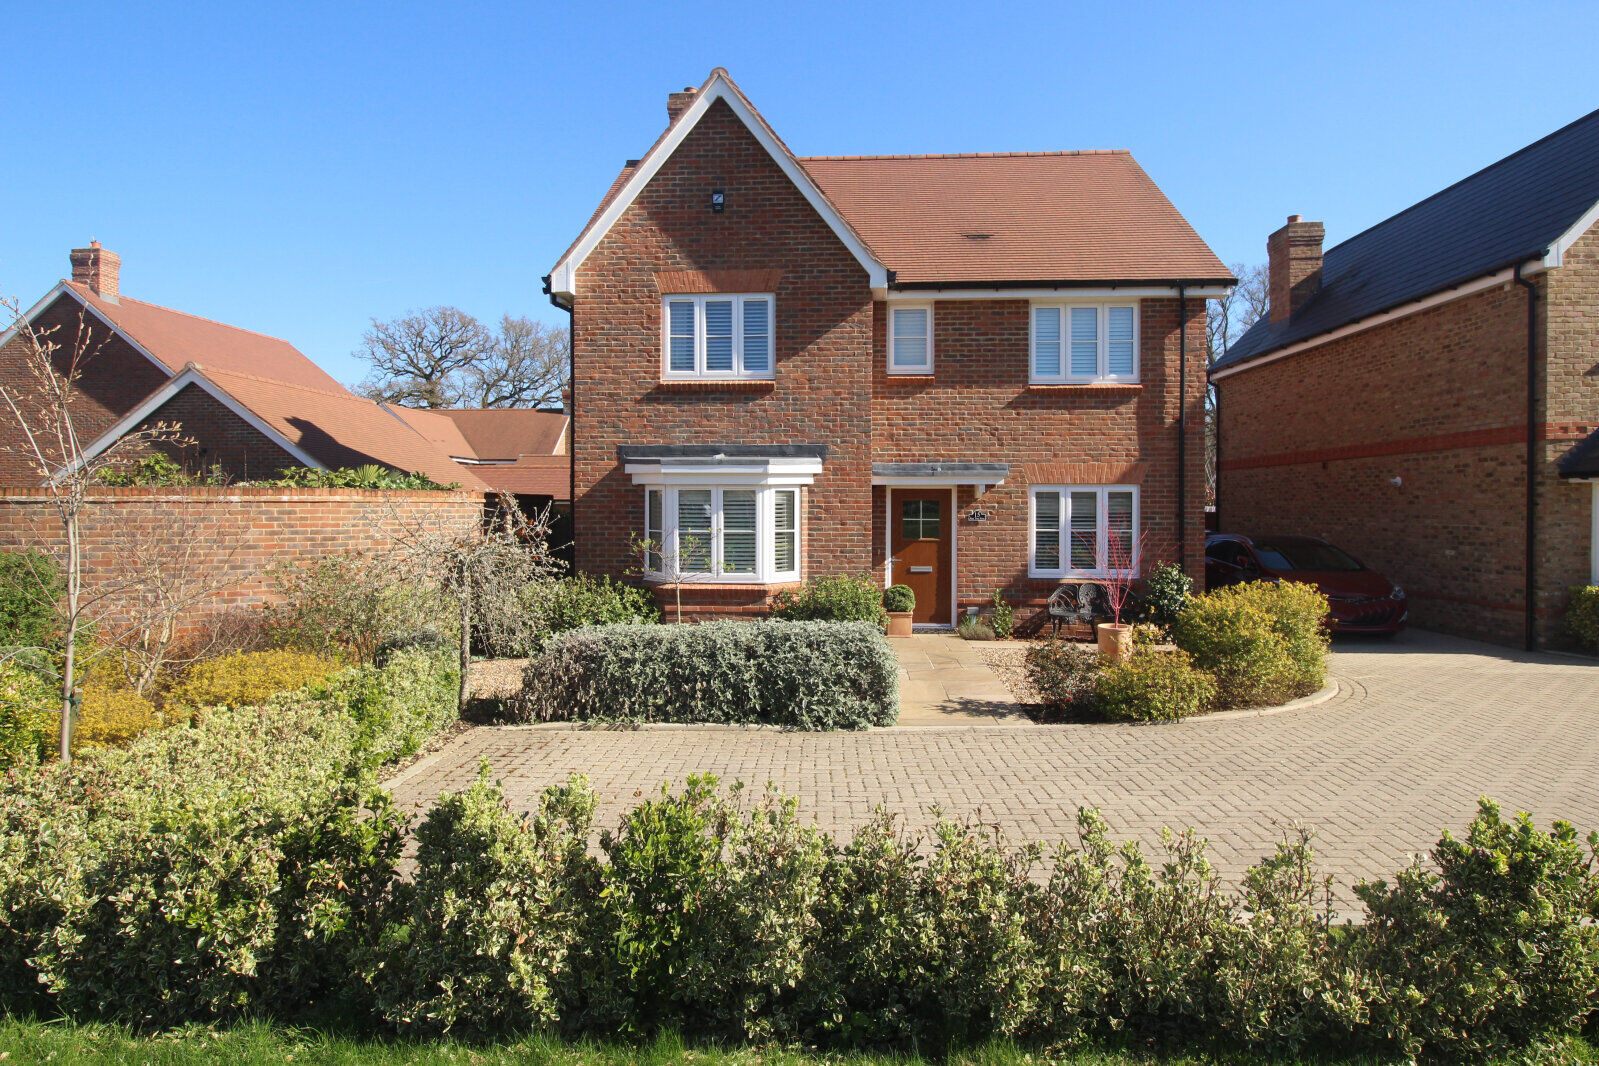 4 bedroom detached house for sale Bay Tree Rise, Sonning Common, RG4, main image